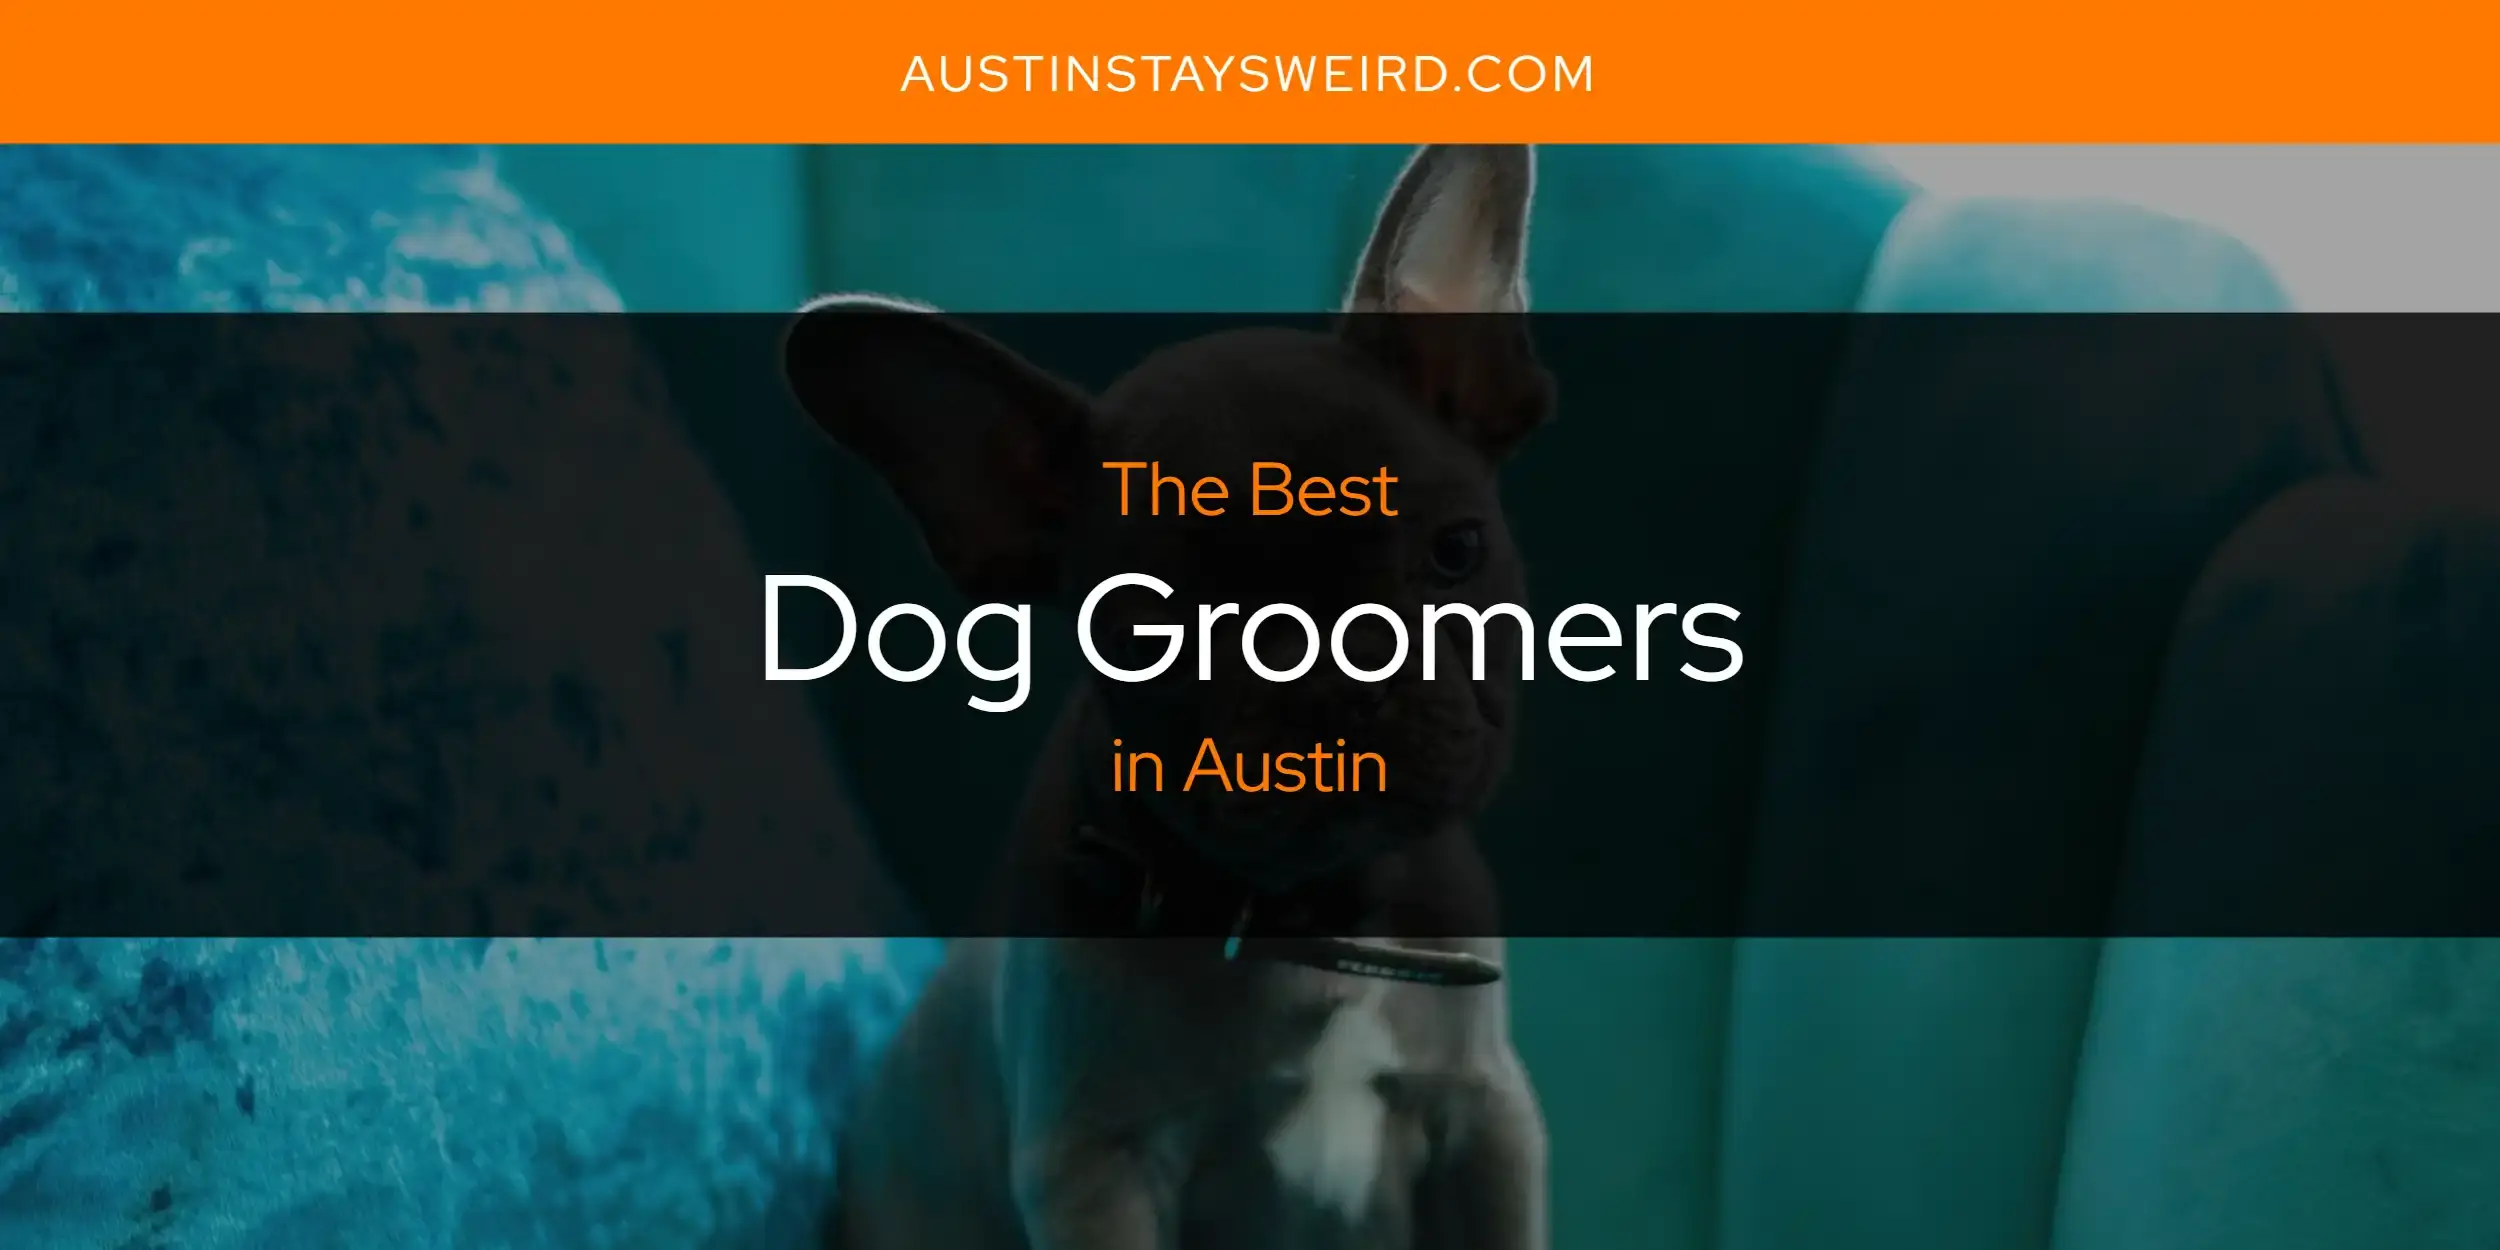 Best Dog Groomers in Austin? Here's the Top 8